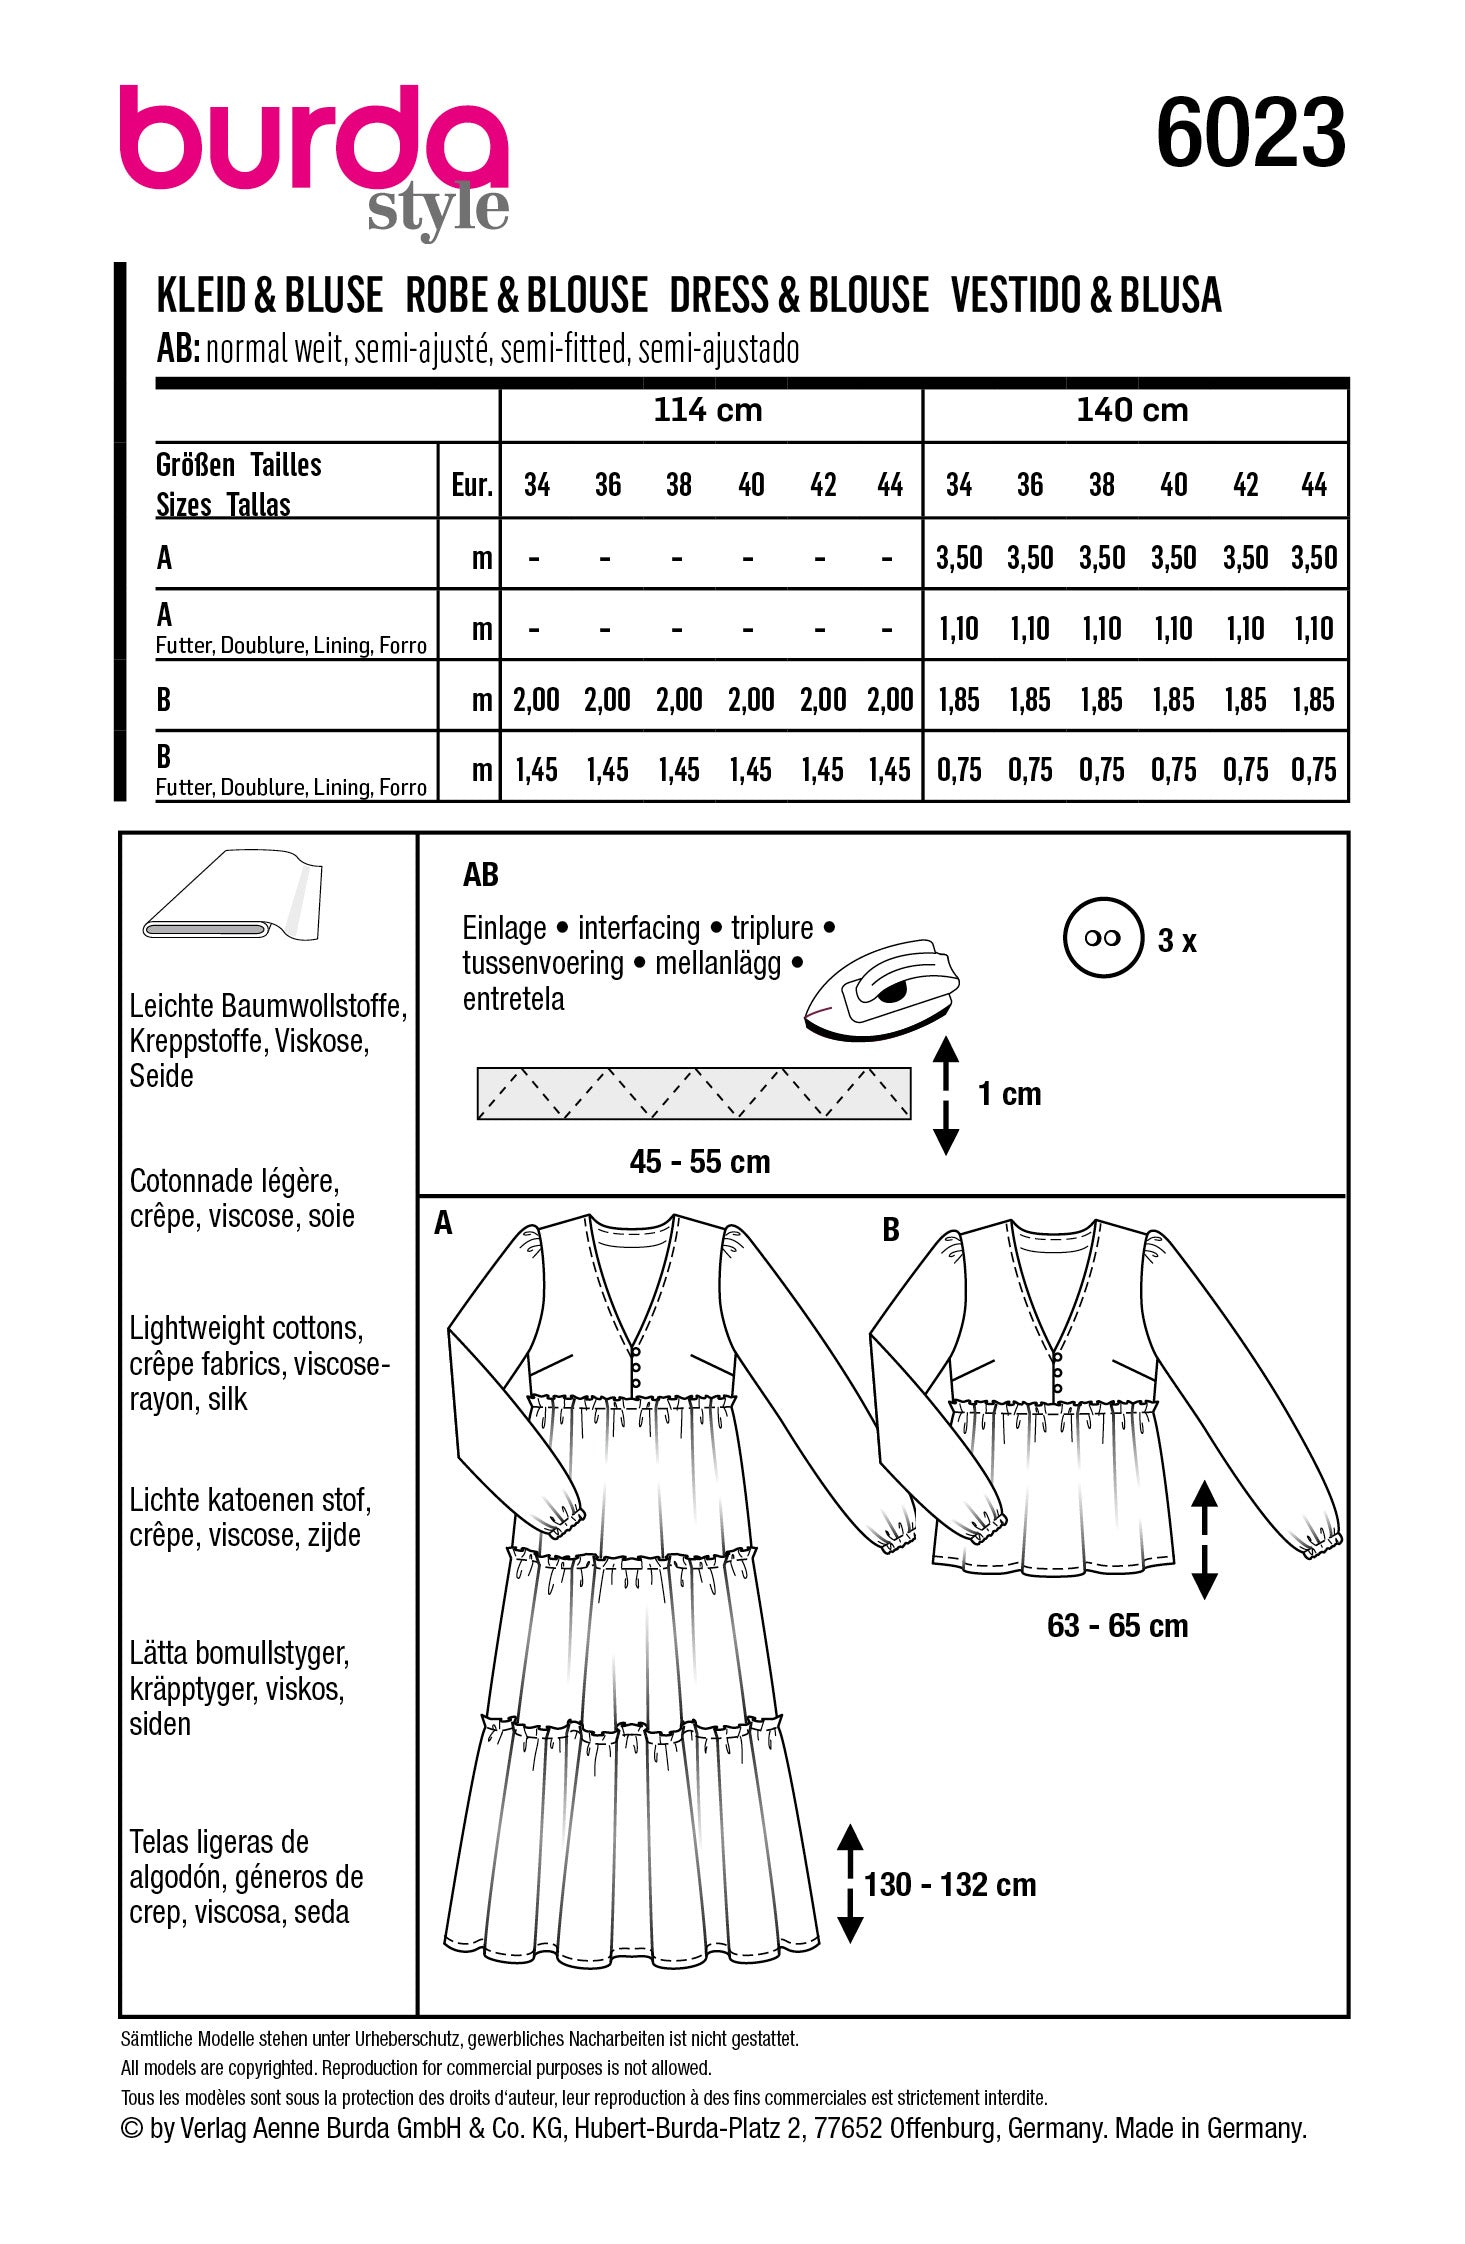 Burda Style Pattern 6023 Ladies Outerwear Dress / Blouse from Jaycotts Sewing Supplies